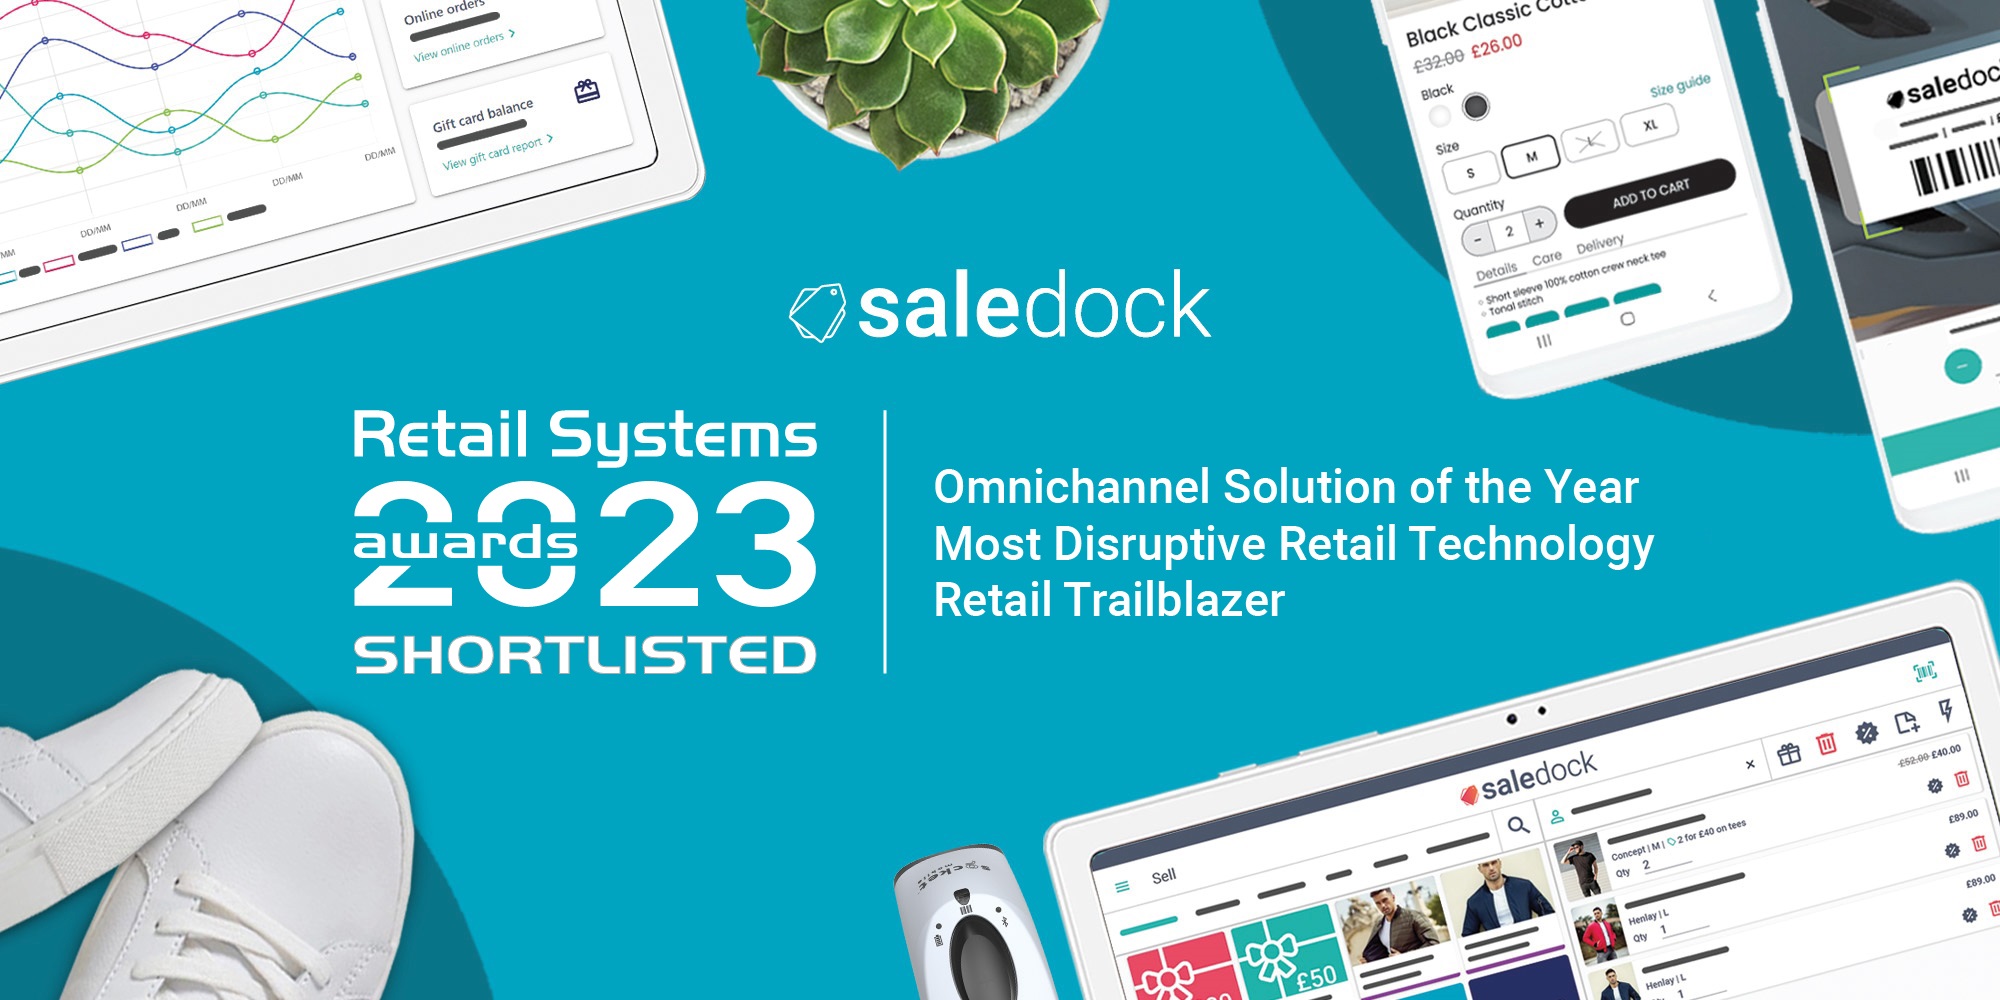 Retail Systems Awards 2023 - Saledock shortlisted for 3 awards!